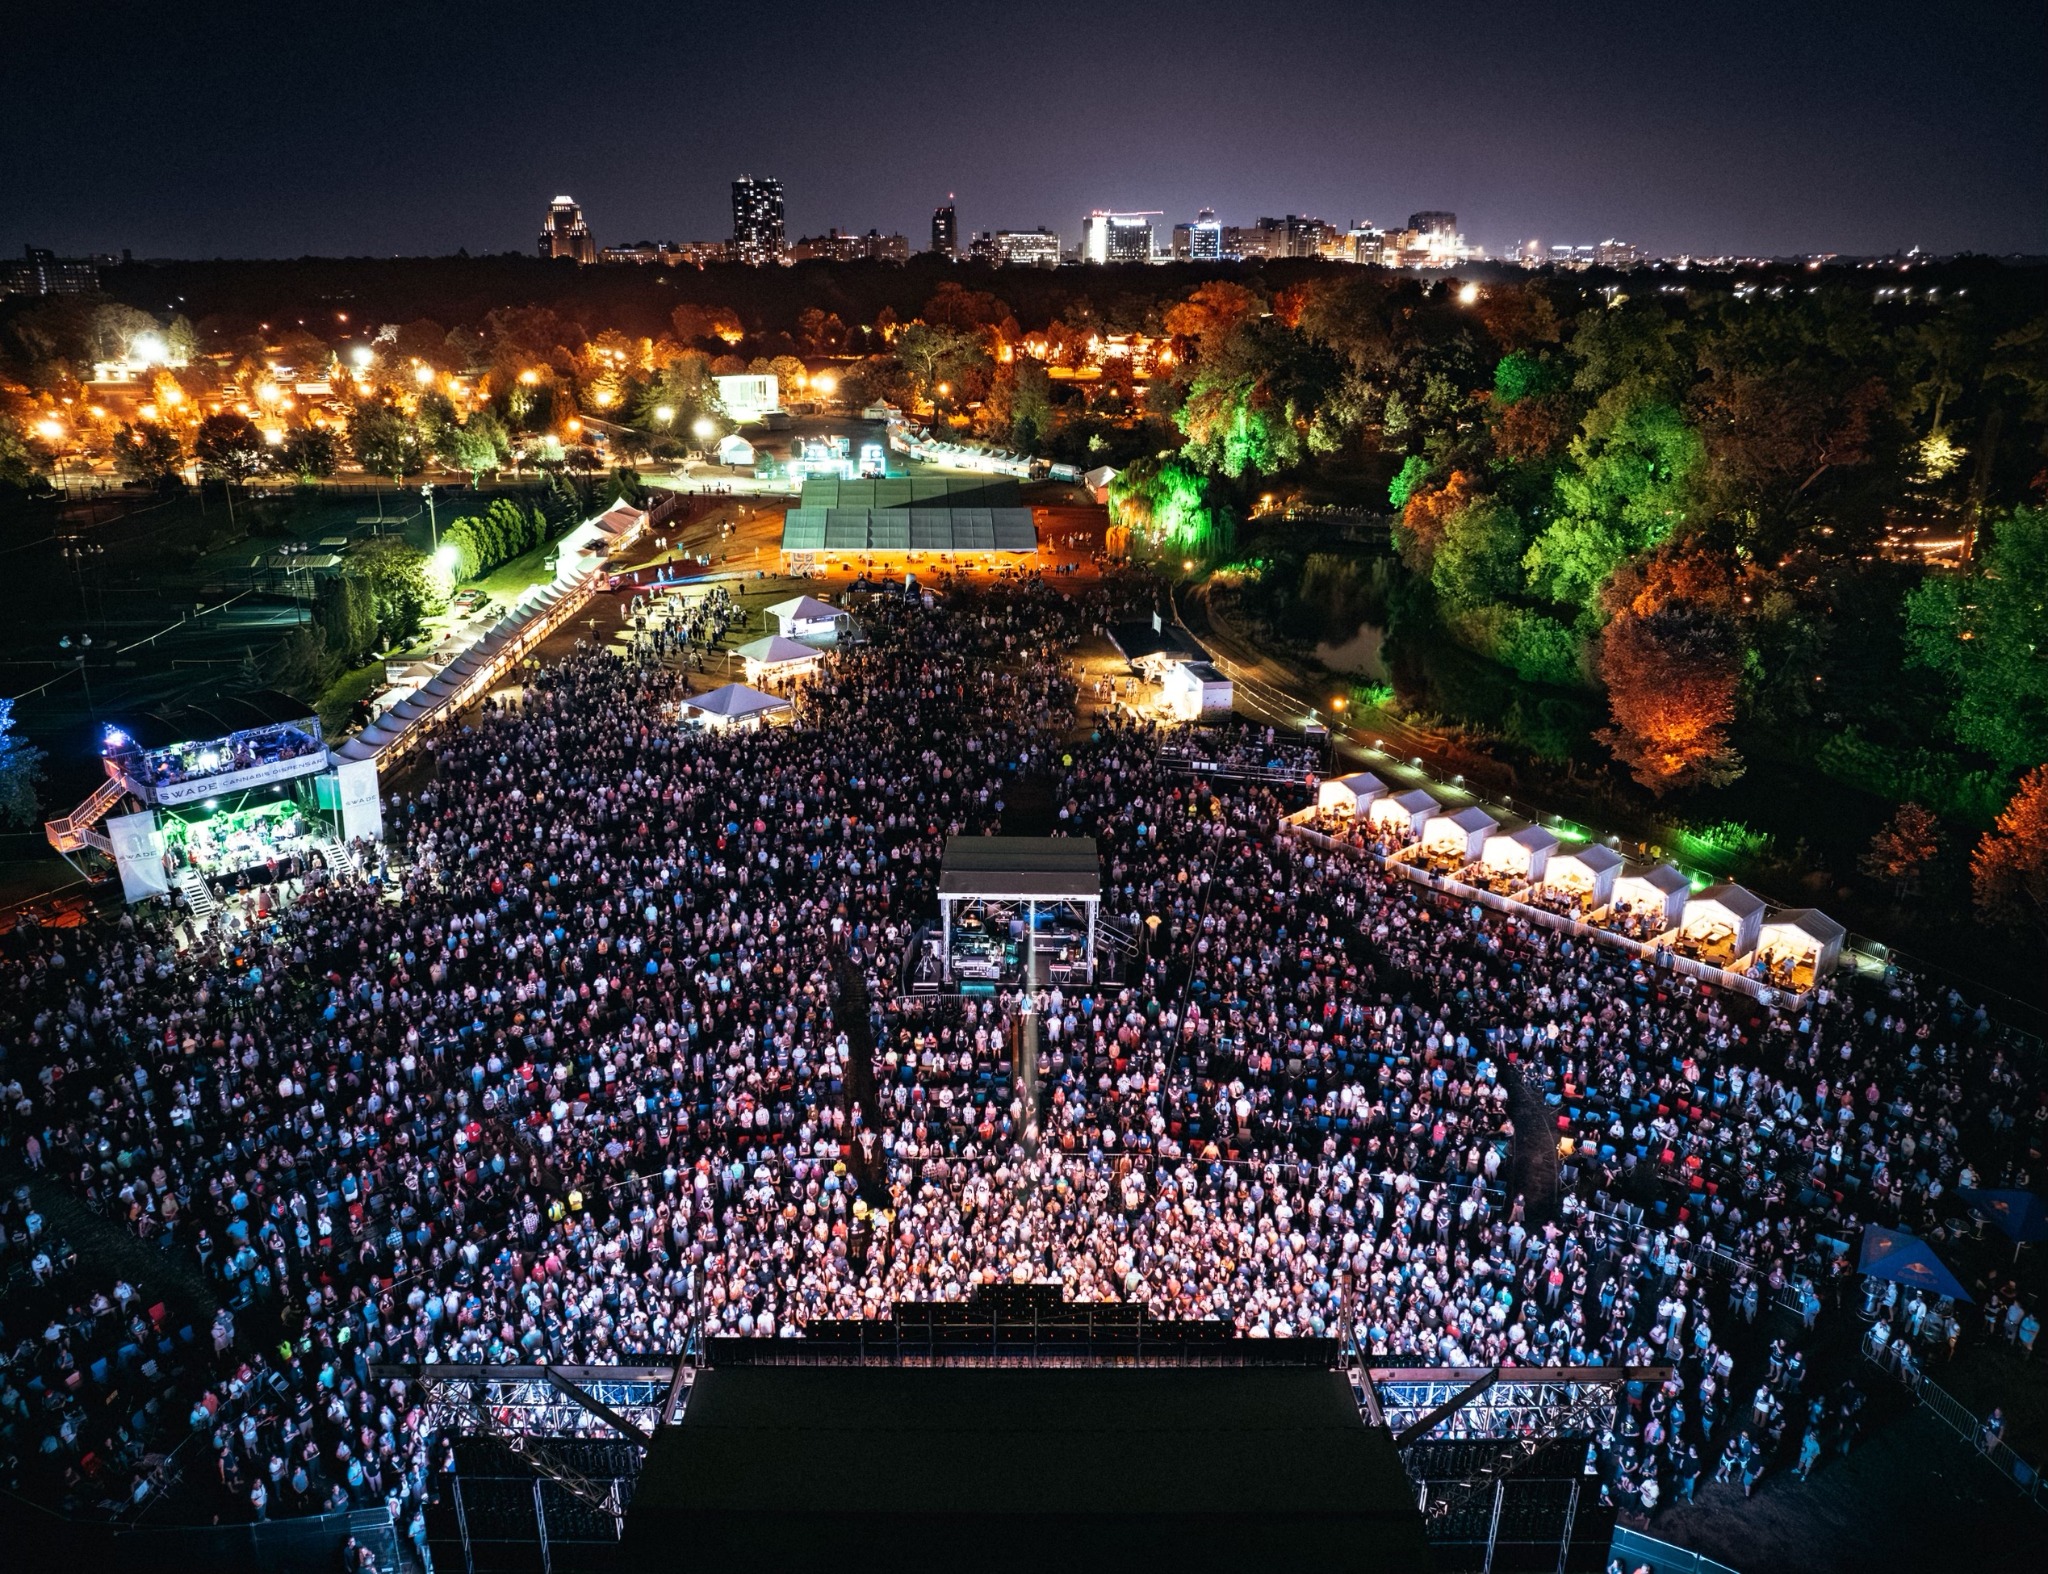 INAUGURAL EVOLUTION FESTIVAL IN ST. LOUIS IS PROCLAIMED A MASSIVE SUCCESS WITH OVER 25,000 FANS